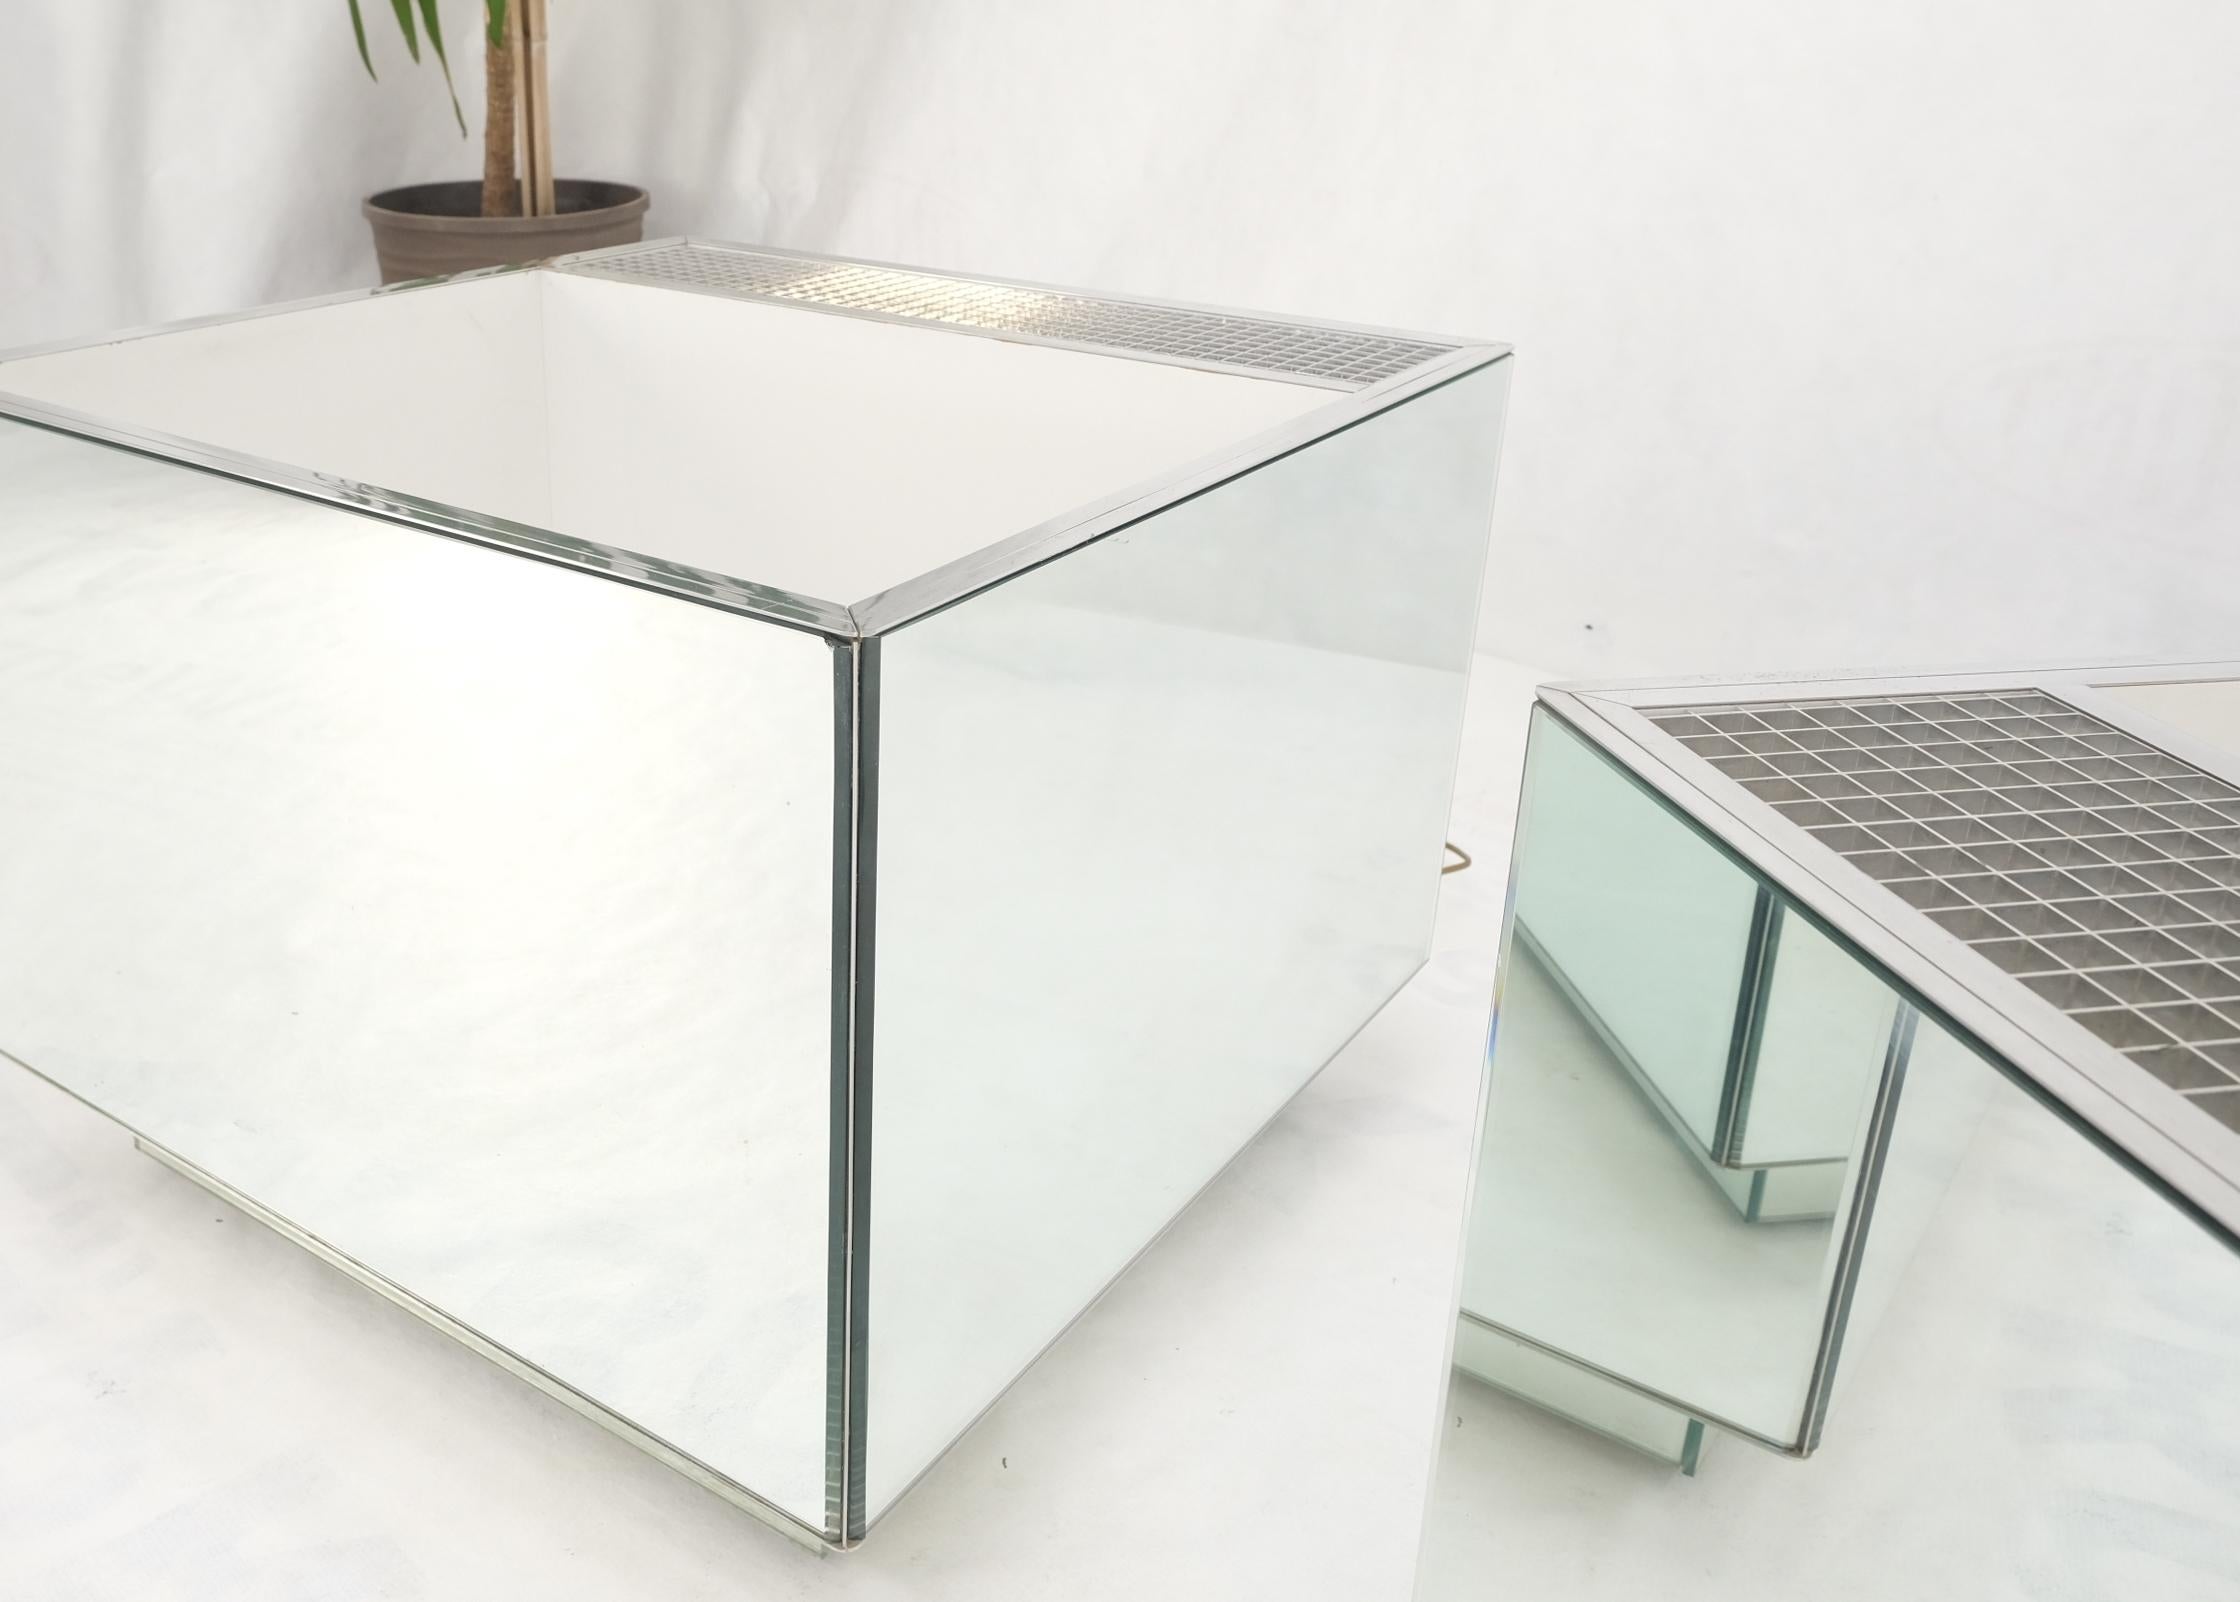 Pair of Very Fine Mirrored Box Planters Lights Stainless Steel Cases For Sale 4